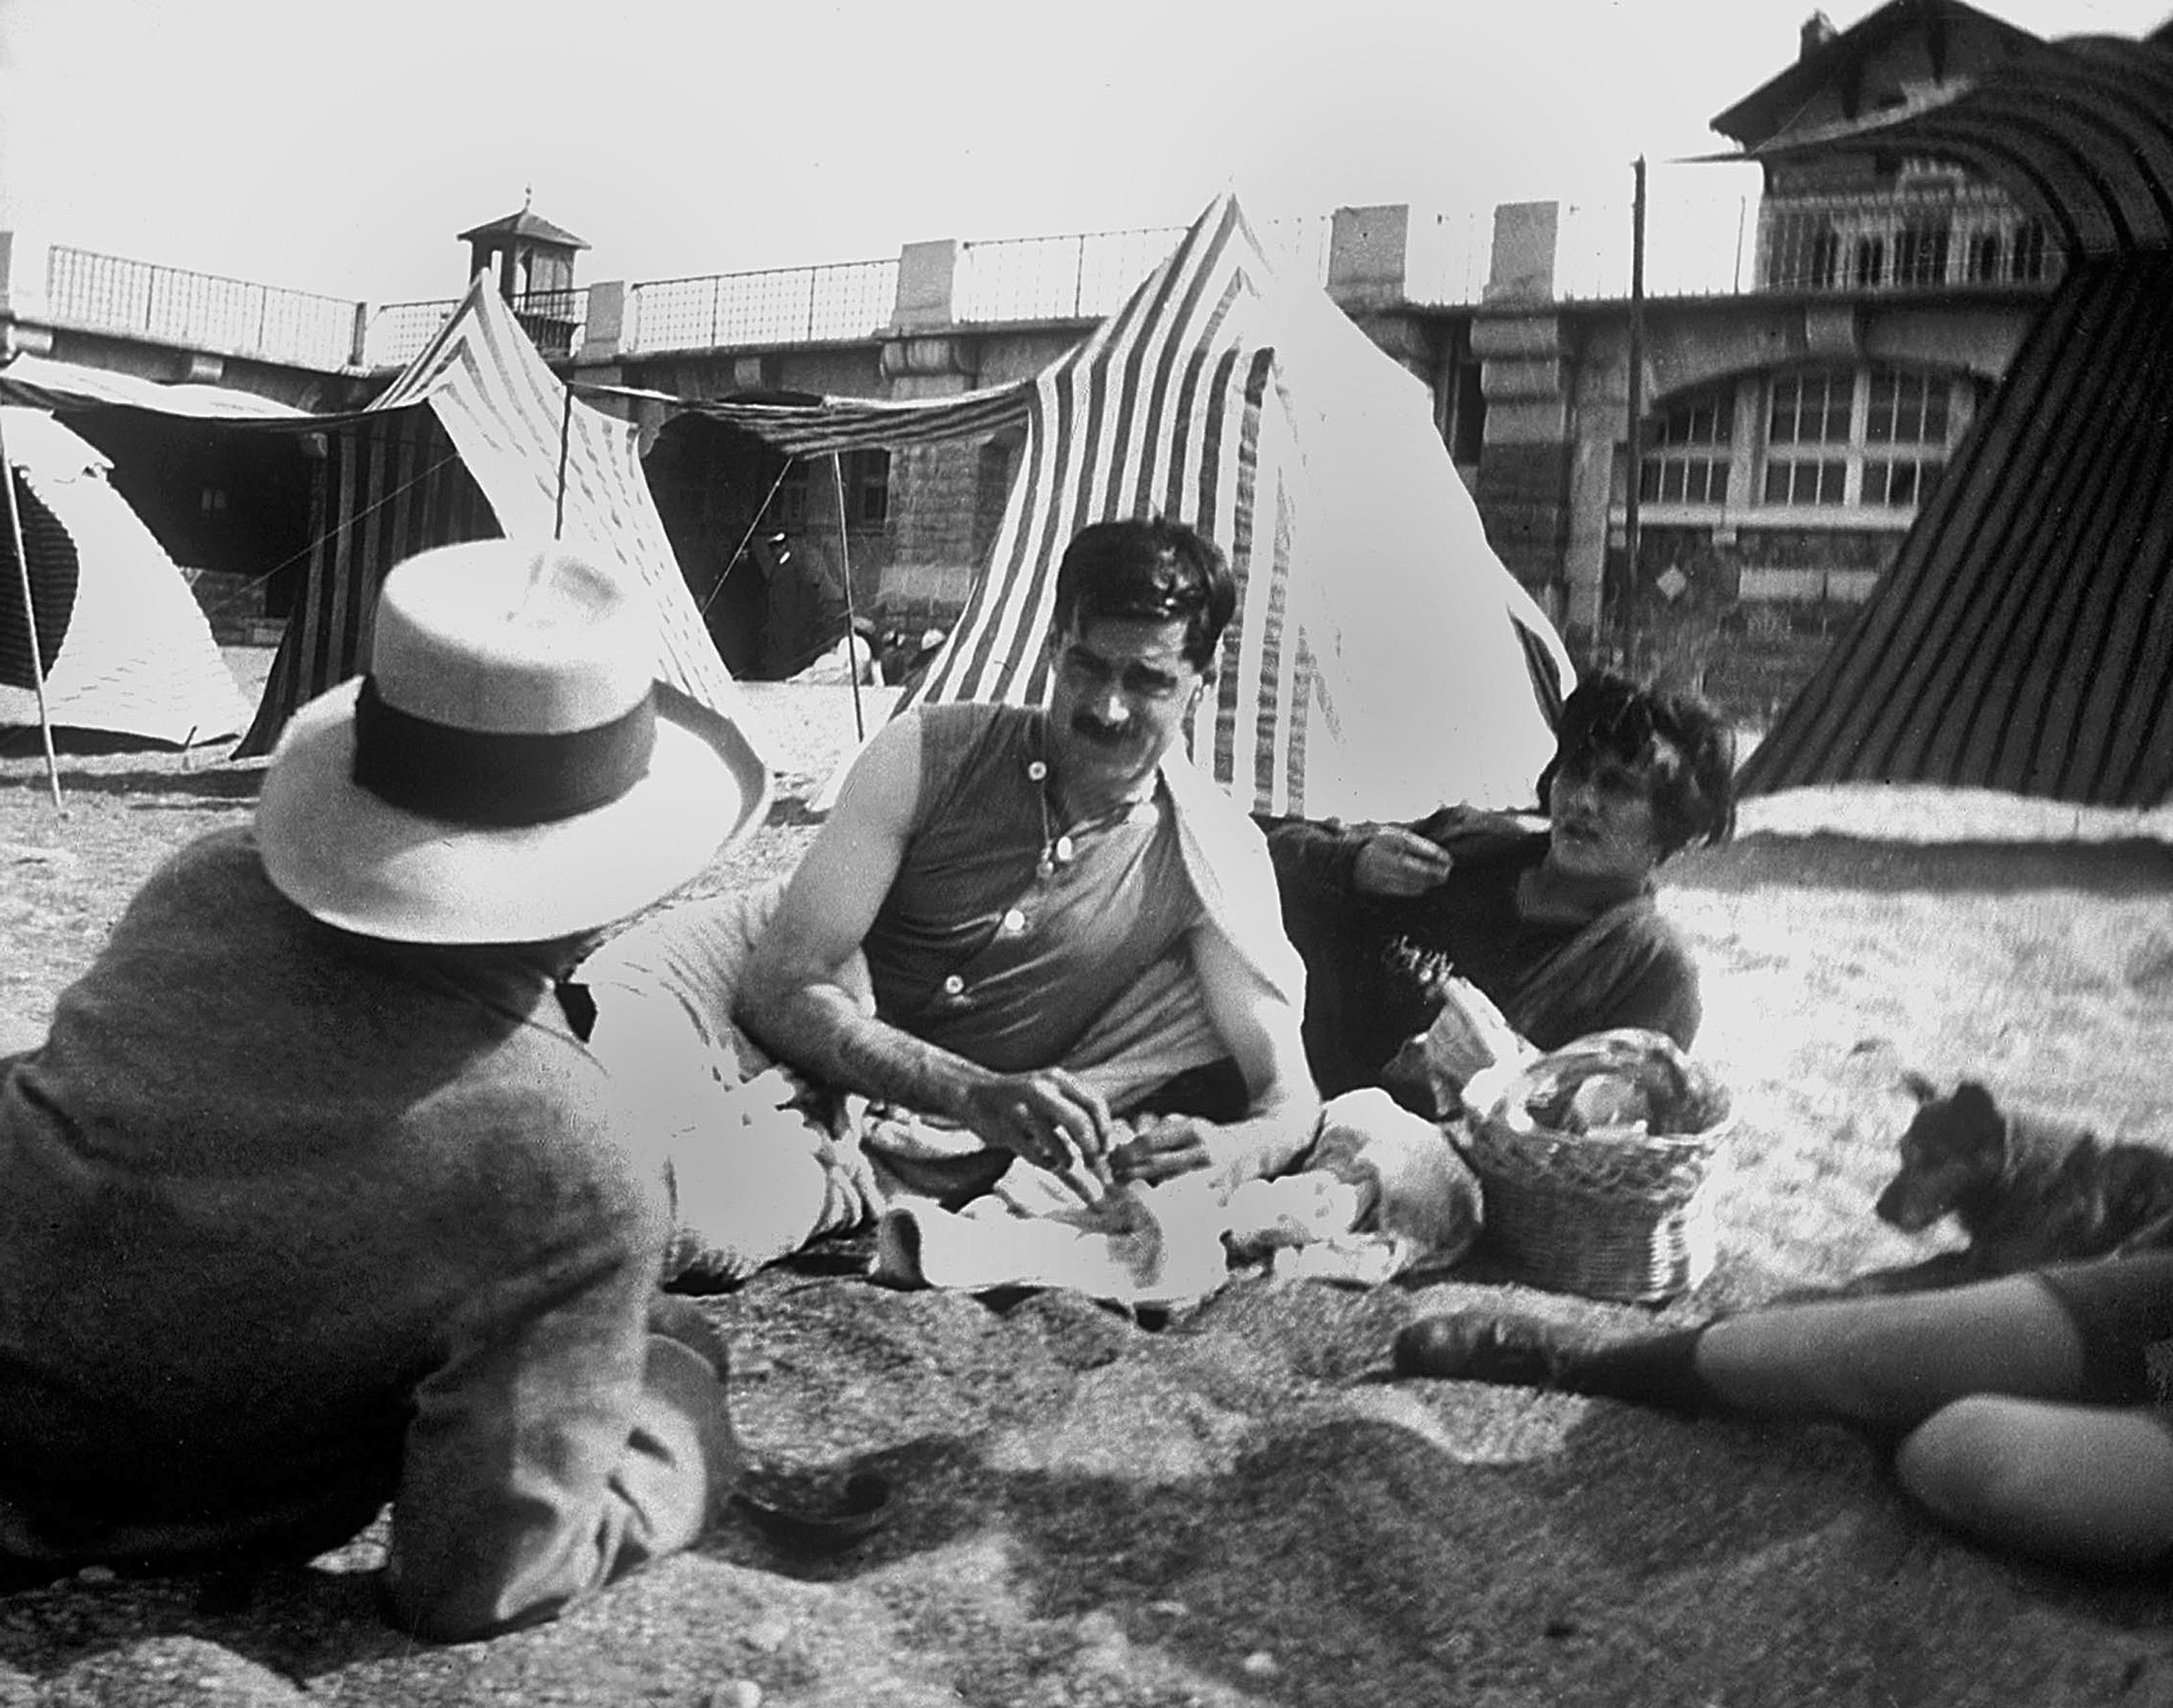 Coco Chanel and her lover Arthur &quot; Boy &quot; Capel (mustache) with Constent Say on the beach in Saint Jean de Luz in 1917